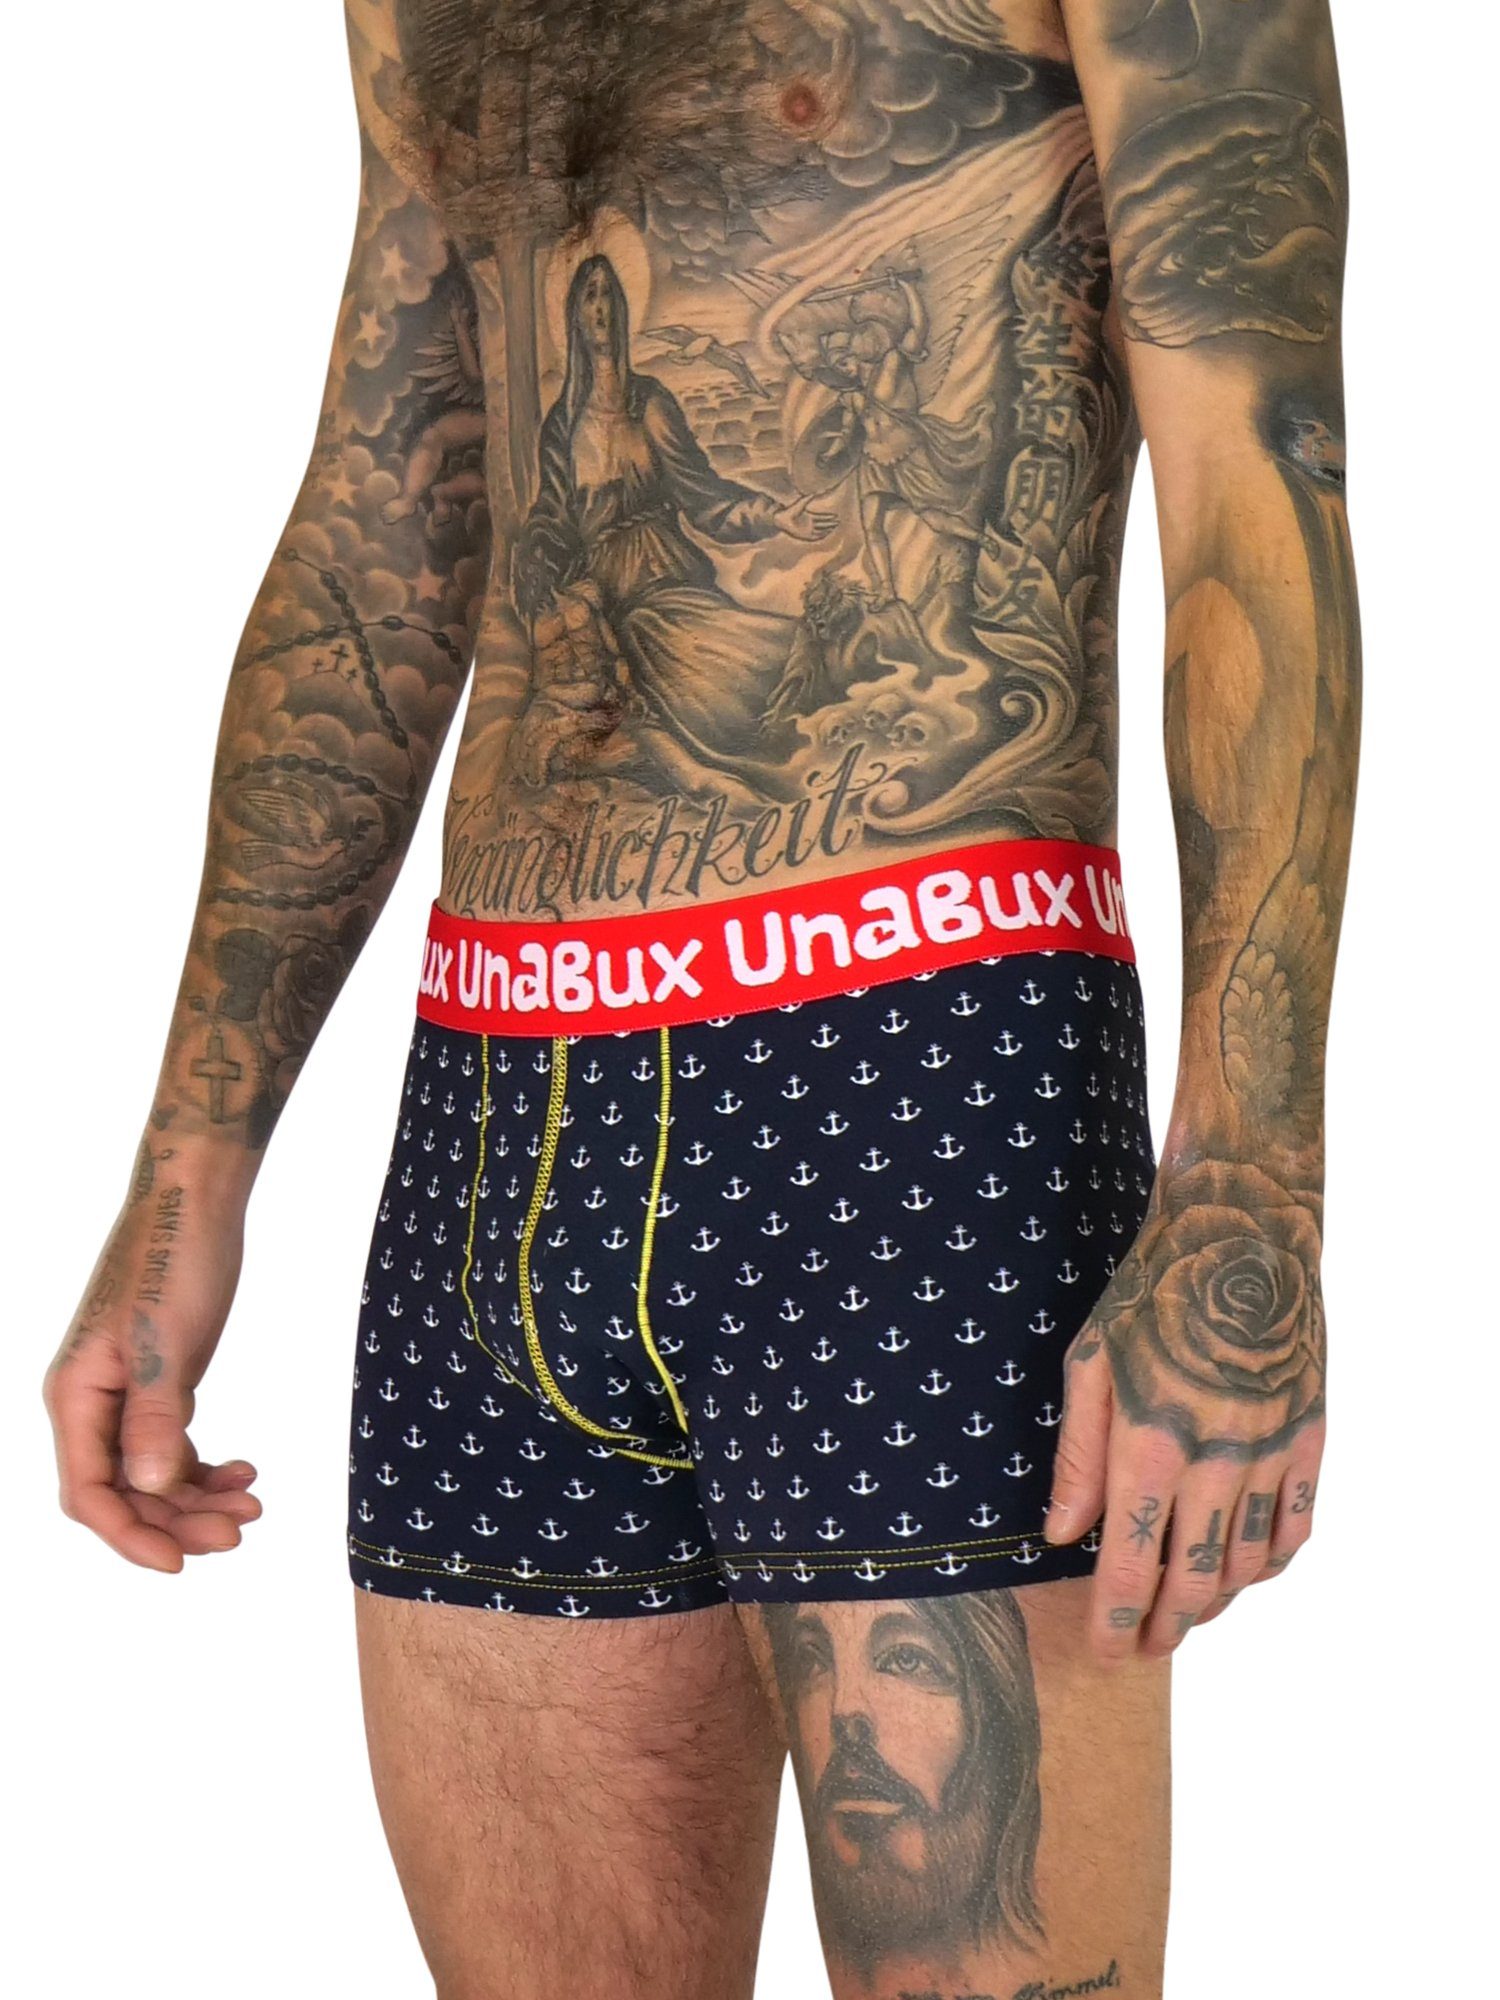 UnaBux Boxer Briefs WOOLHEAD (2-St) Boxershorts Doppelpack OLD ANCHOR / FINGERS GOOD FIVE